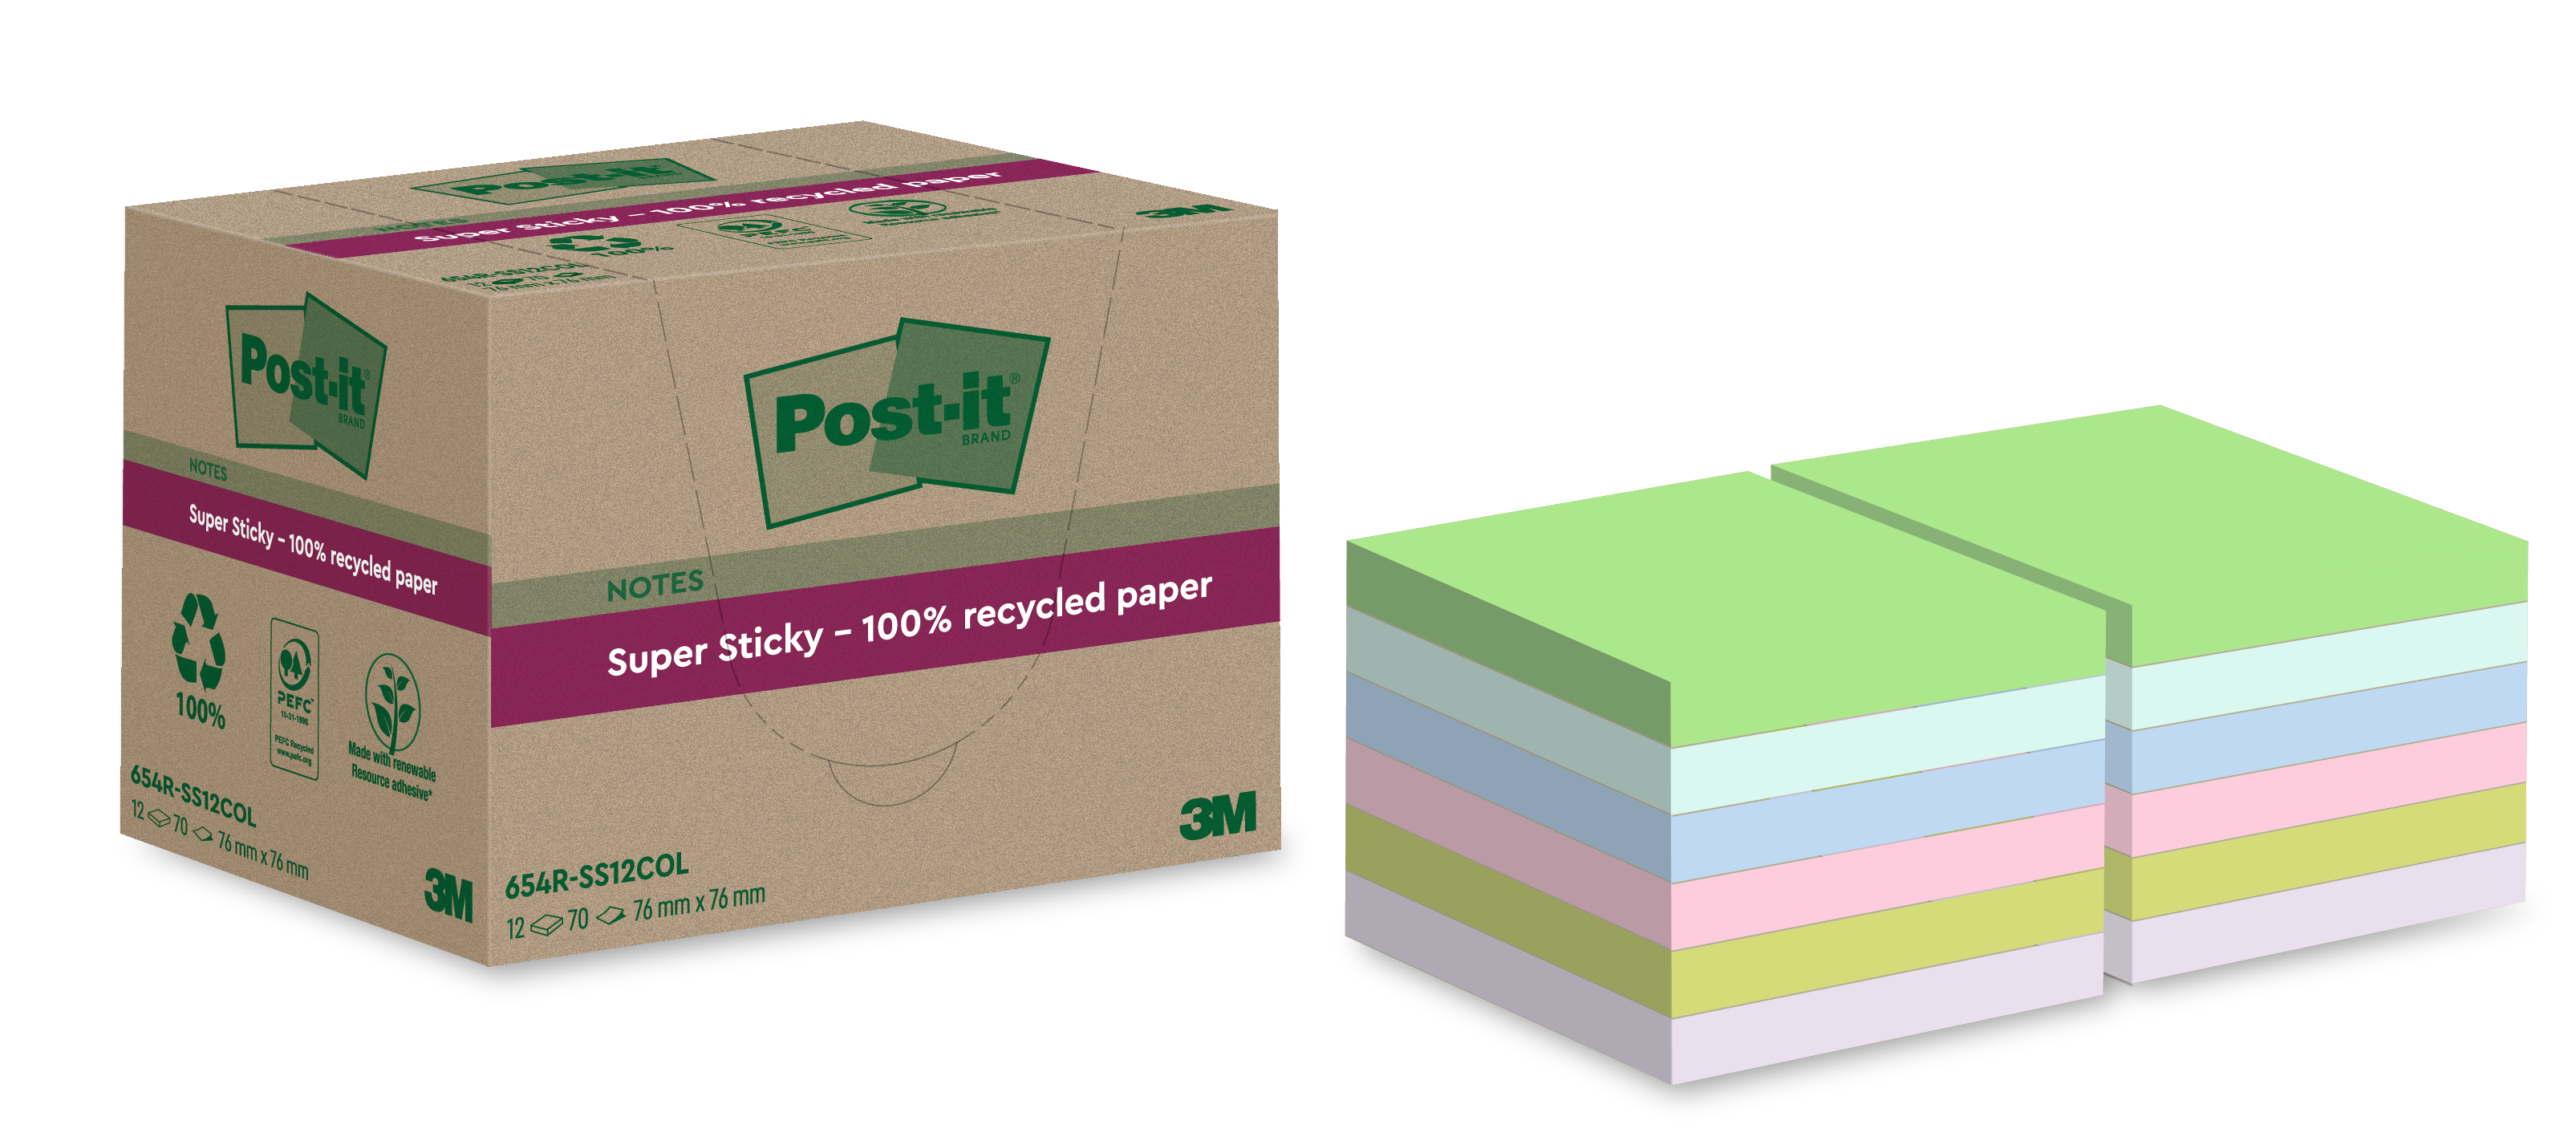 POST-IT SuperSticky Notes 76x76mm 654 RSS12COL Recycling,assort. 12x70 flls.